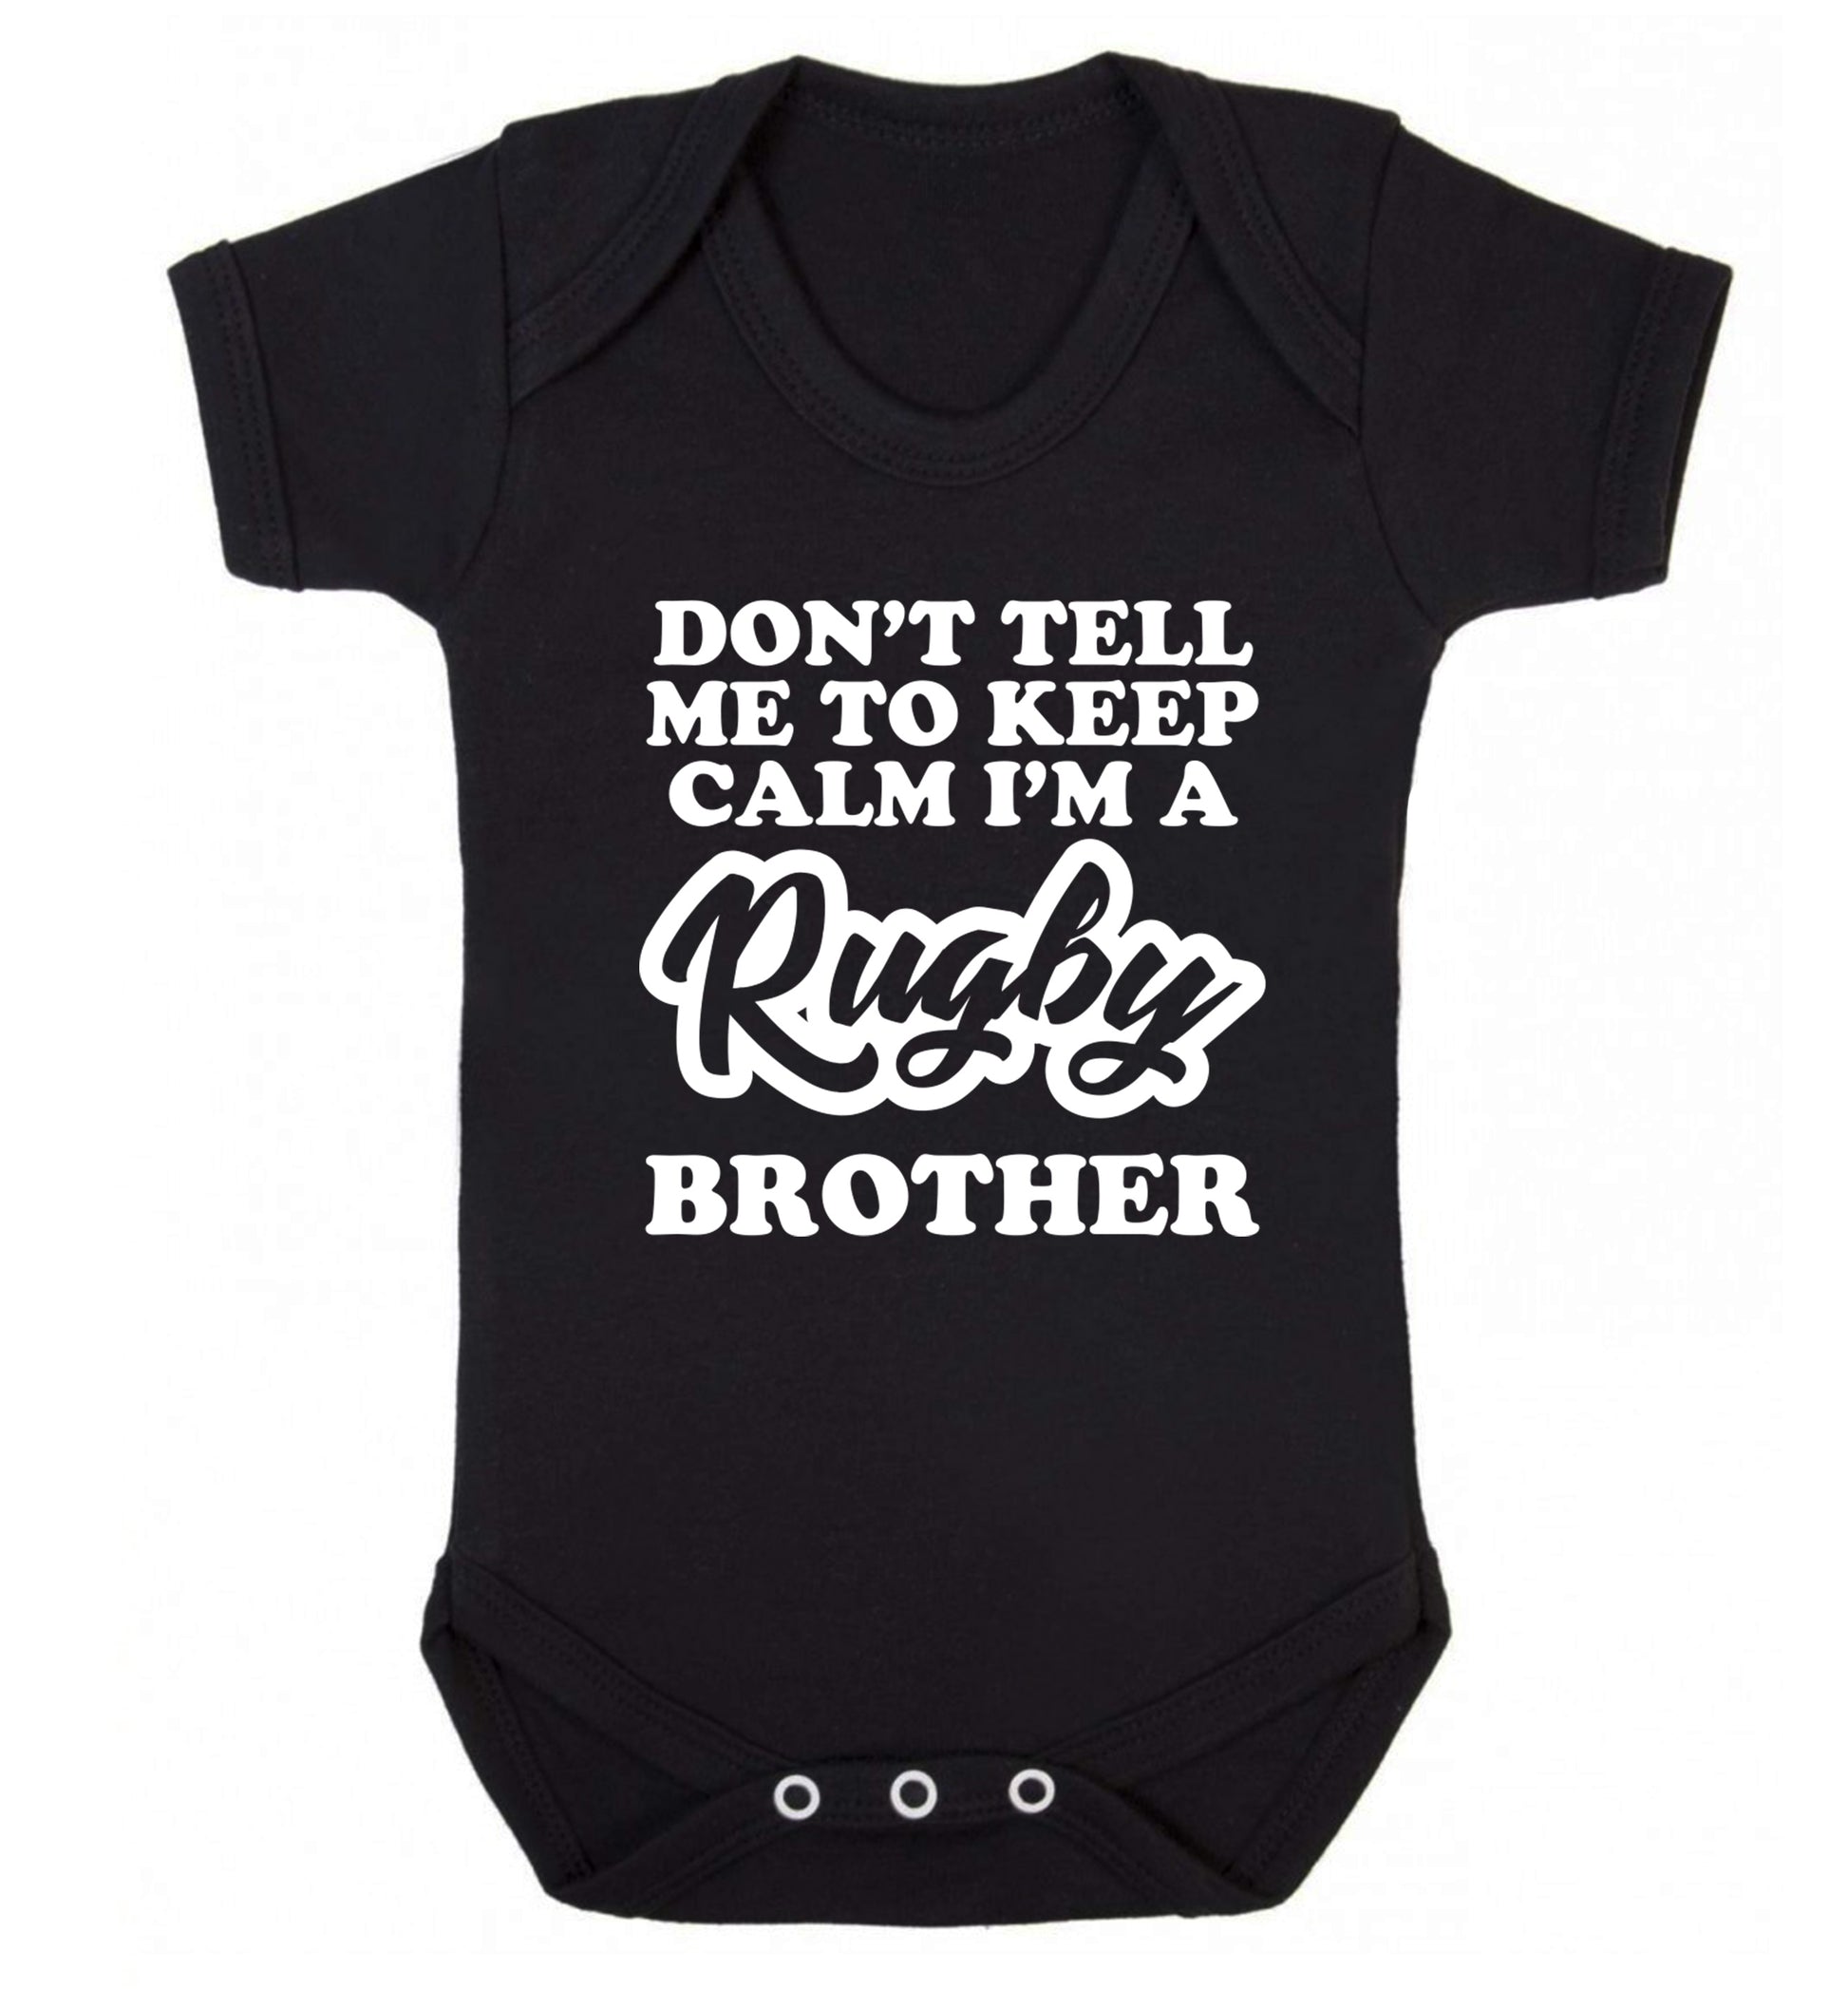 Don't tell me keep calm I'm a rugby brother Baby Vest black 18-24 months